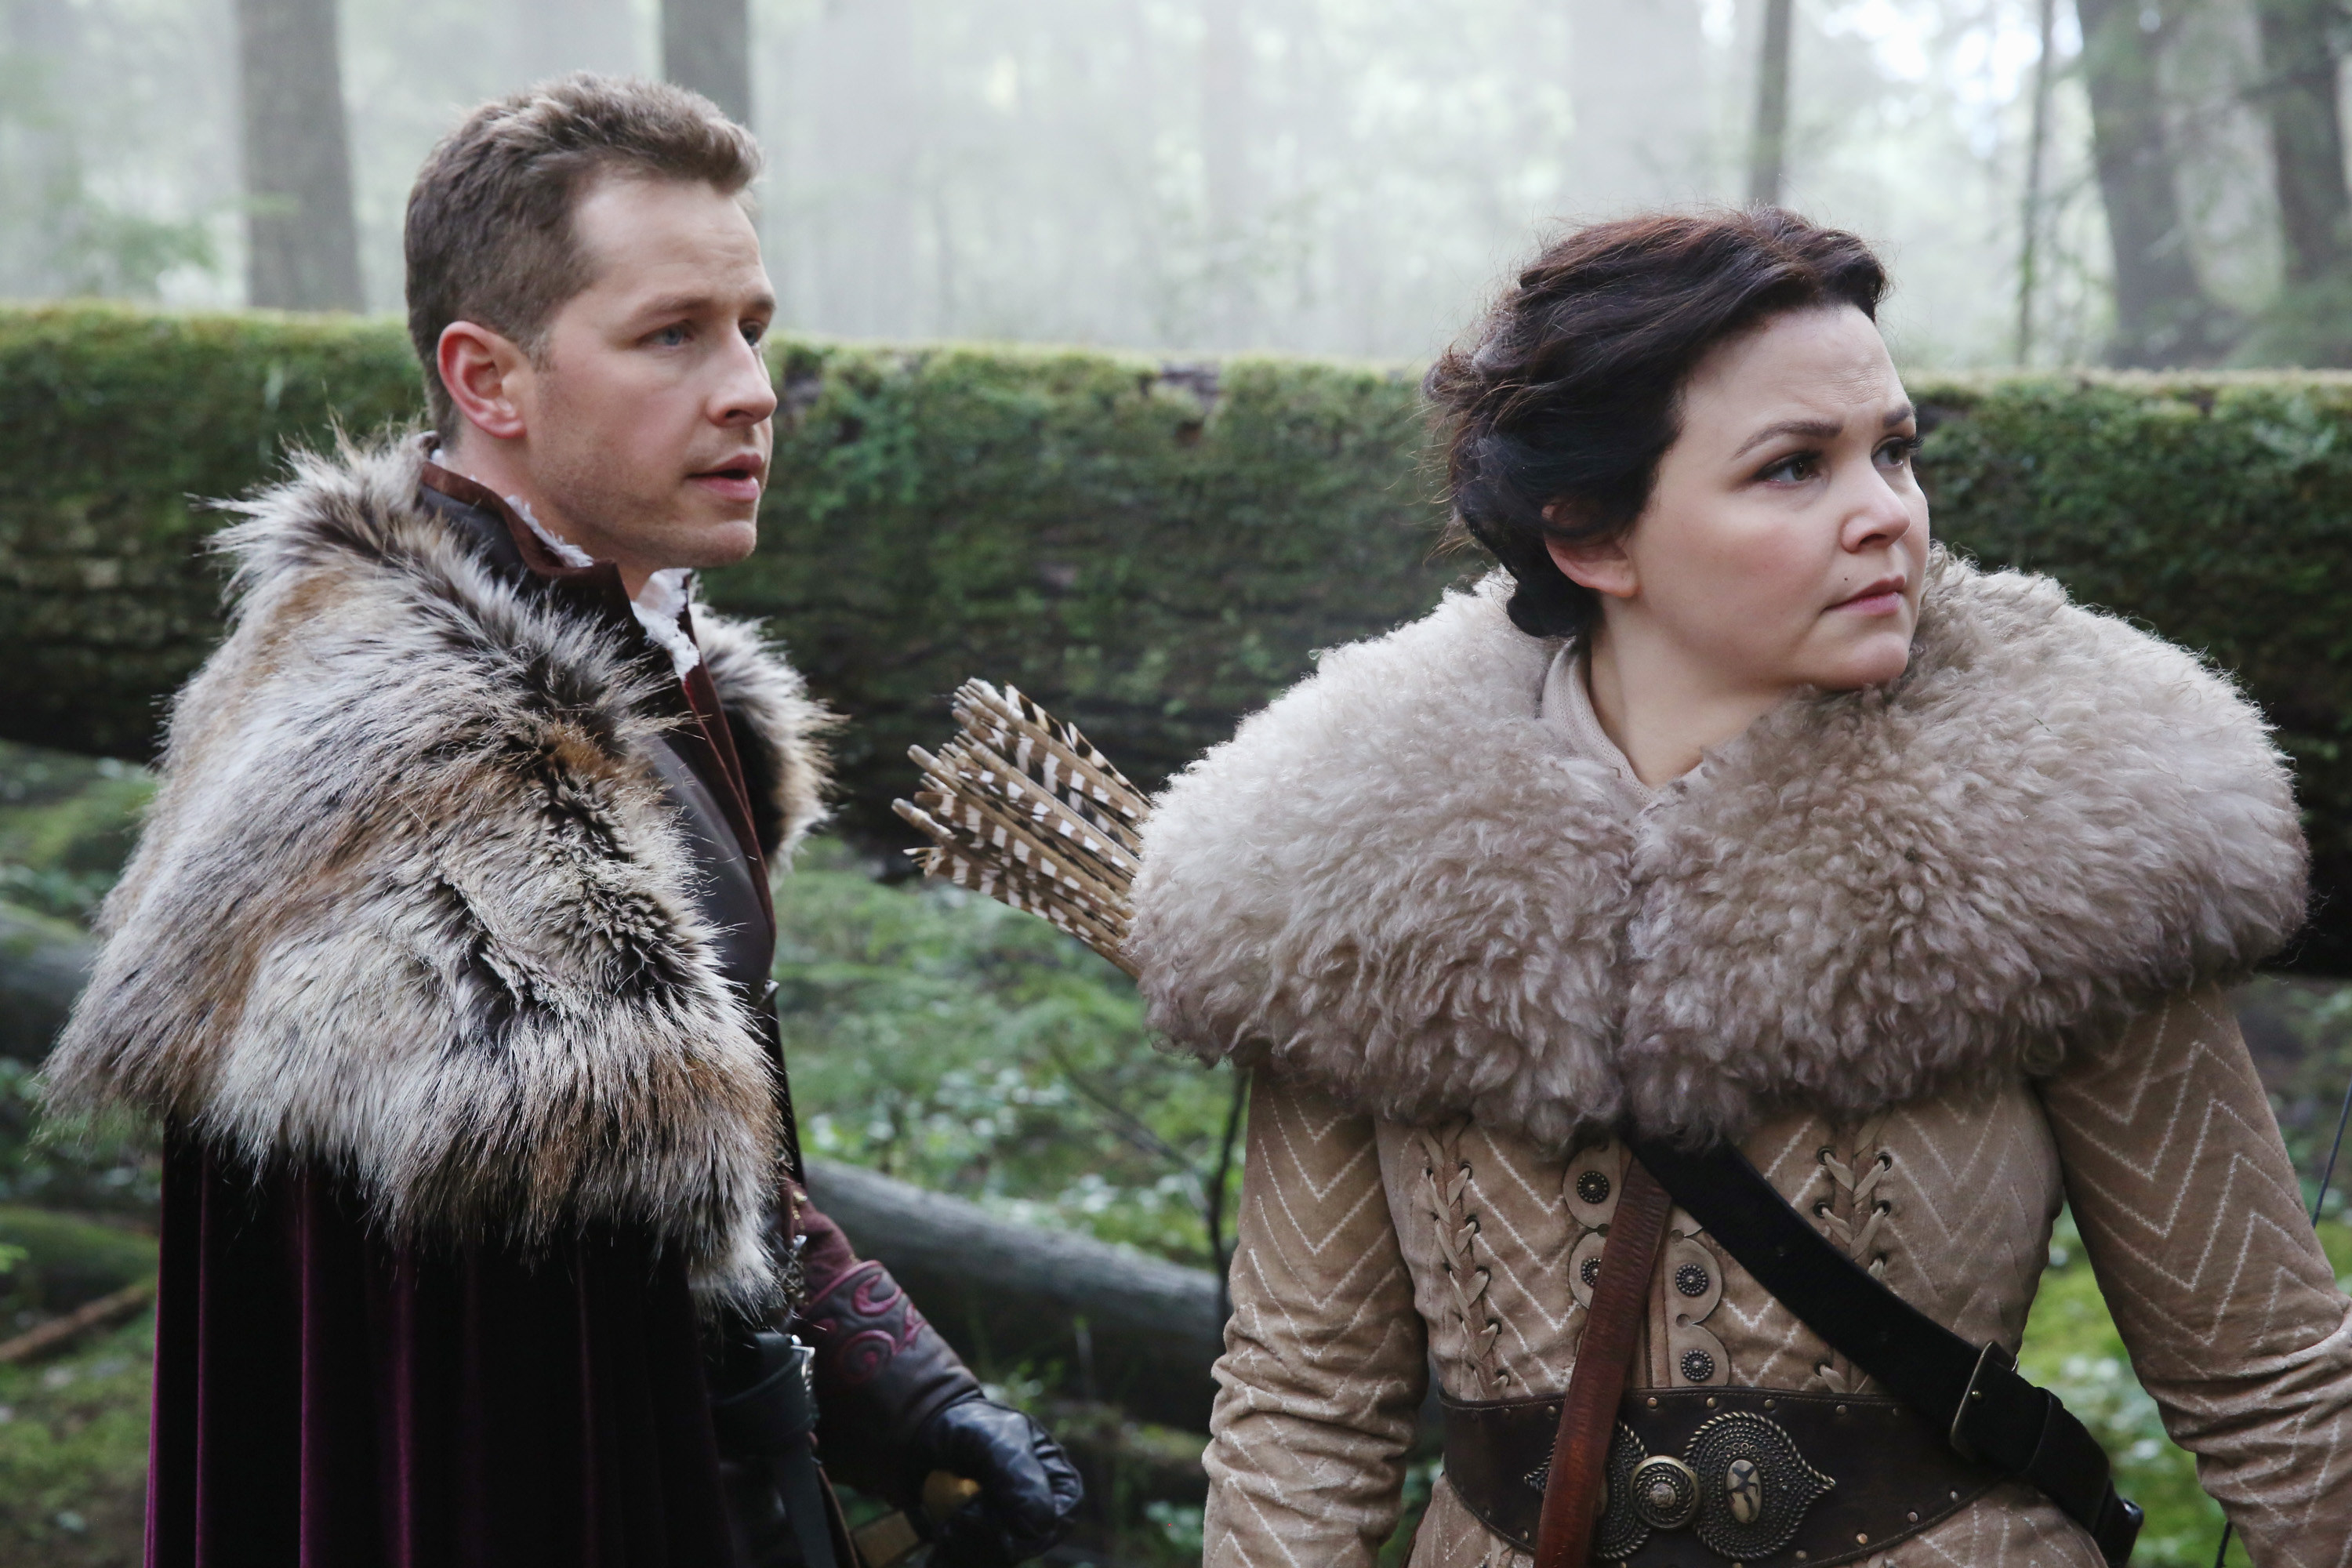 Charming and Snow go hunting